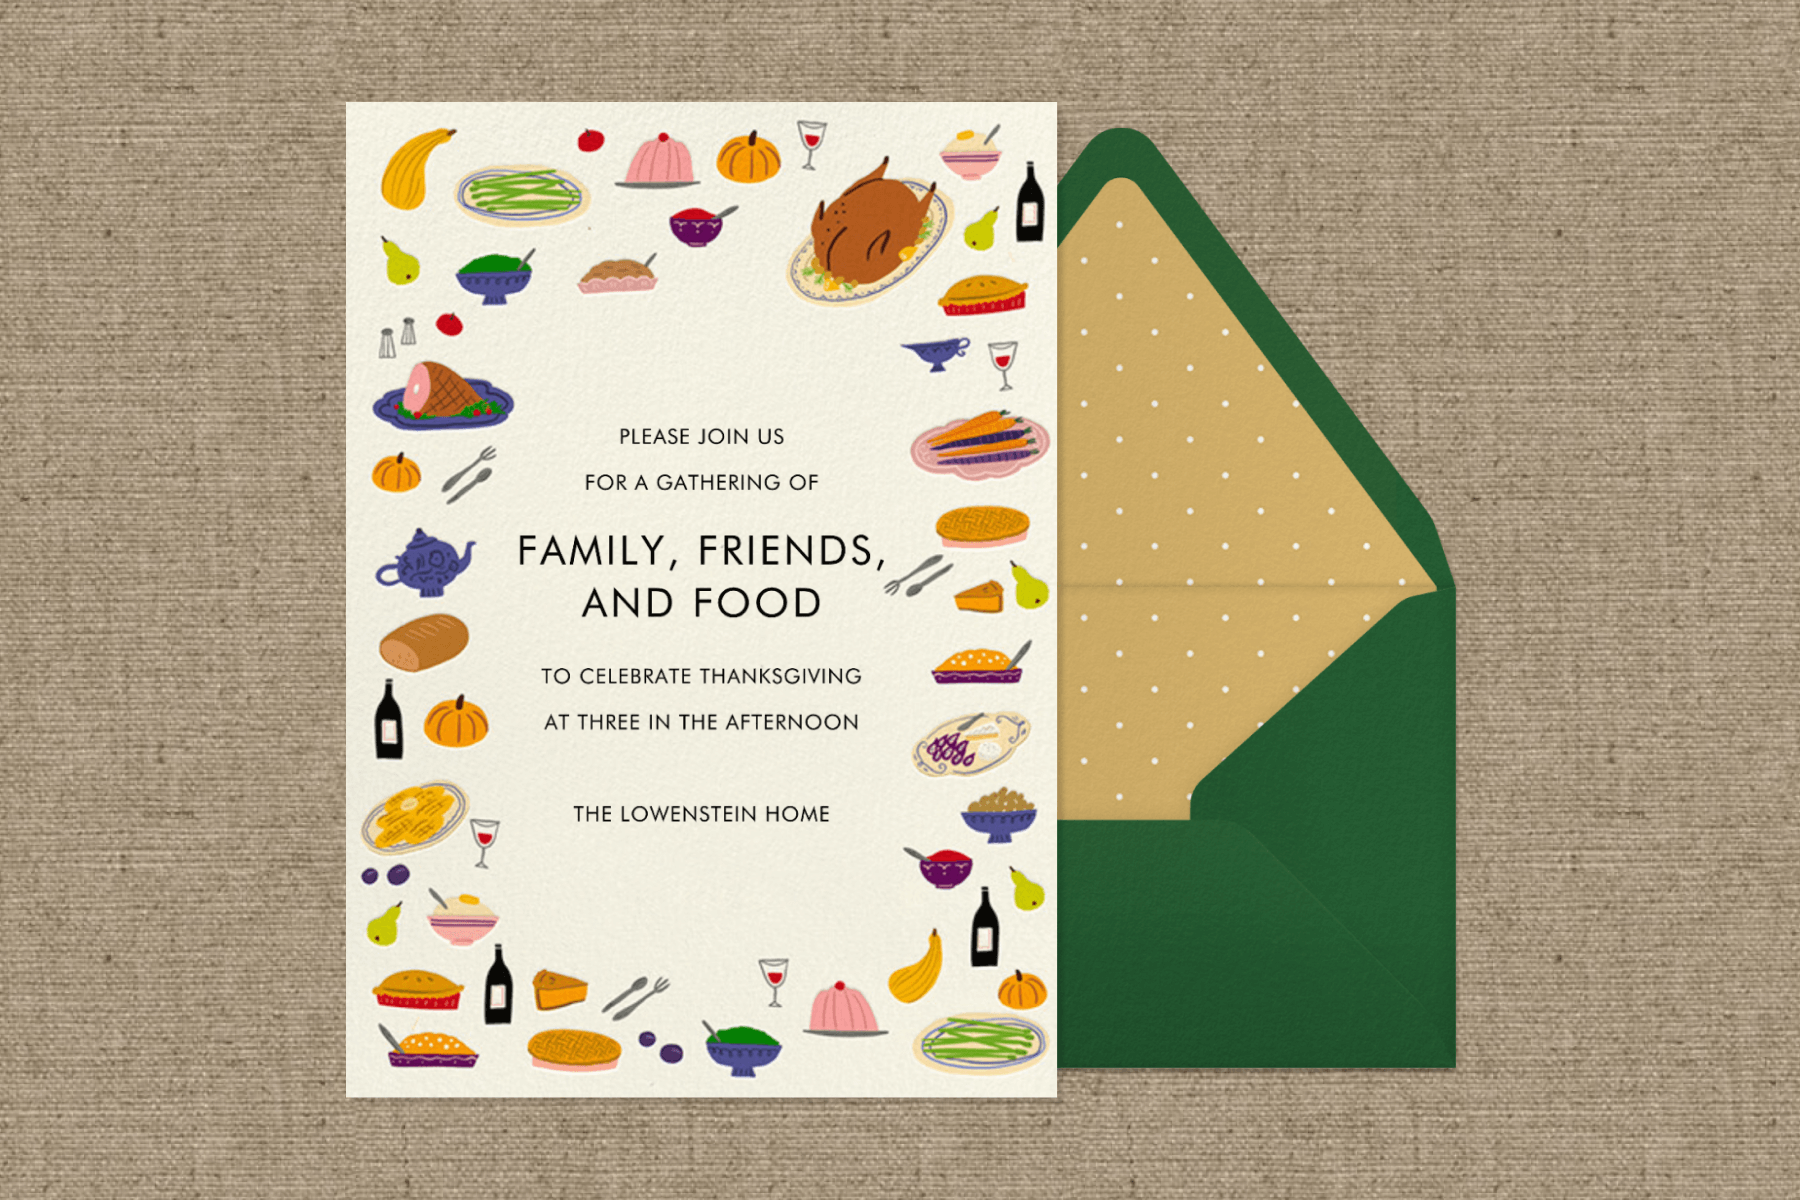 Colorful Thanksgiving invitation with food surrounding the border and says, "Please join us for a gathering of family, friends, and food to celebrate Thanksgiving at three in the afternoon."